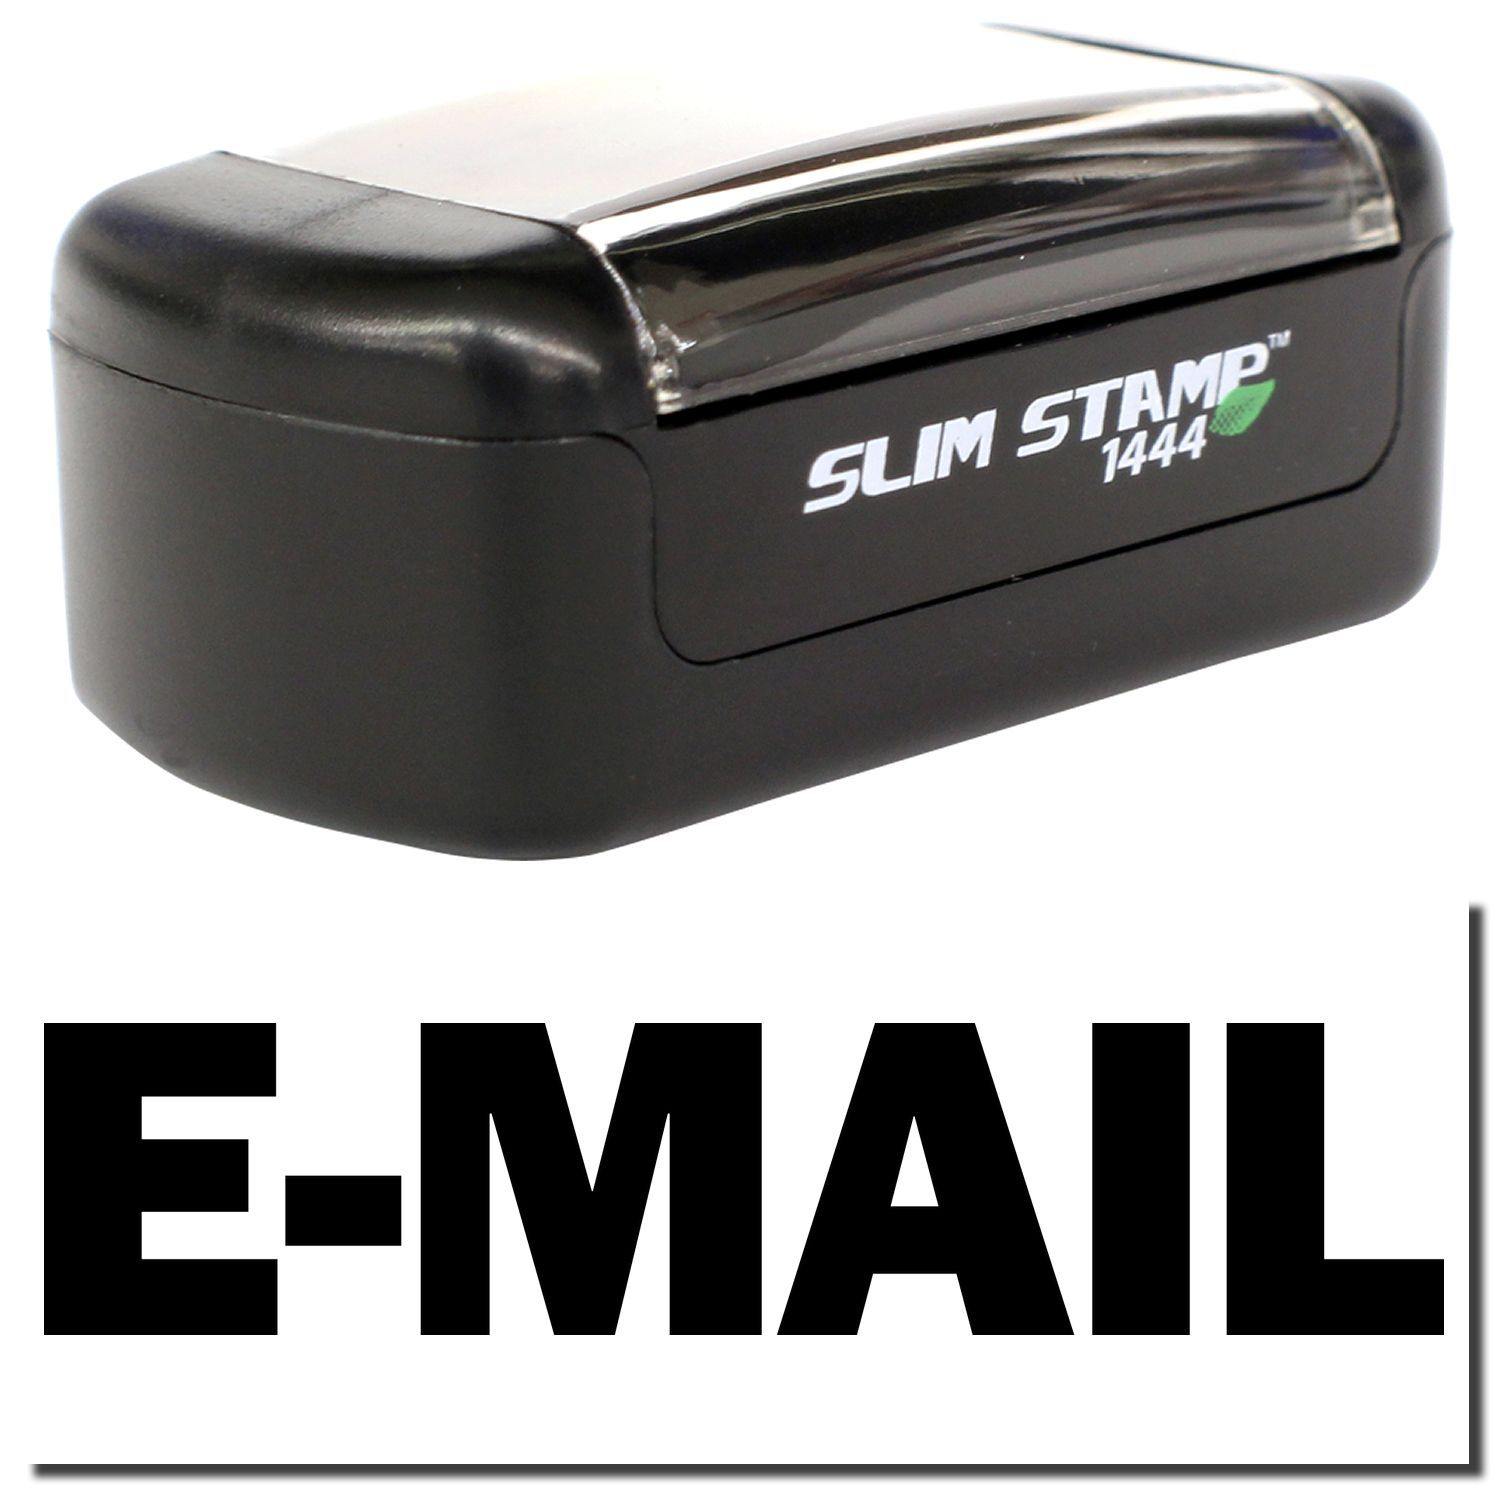 A stock office pre-inked stamp with a stamped image showing how the text "E-MAIL" is displayed after stamping.